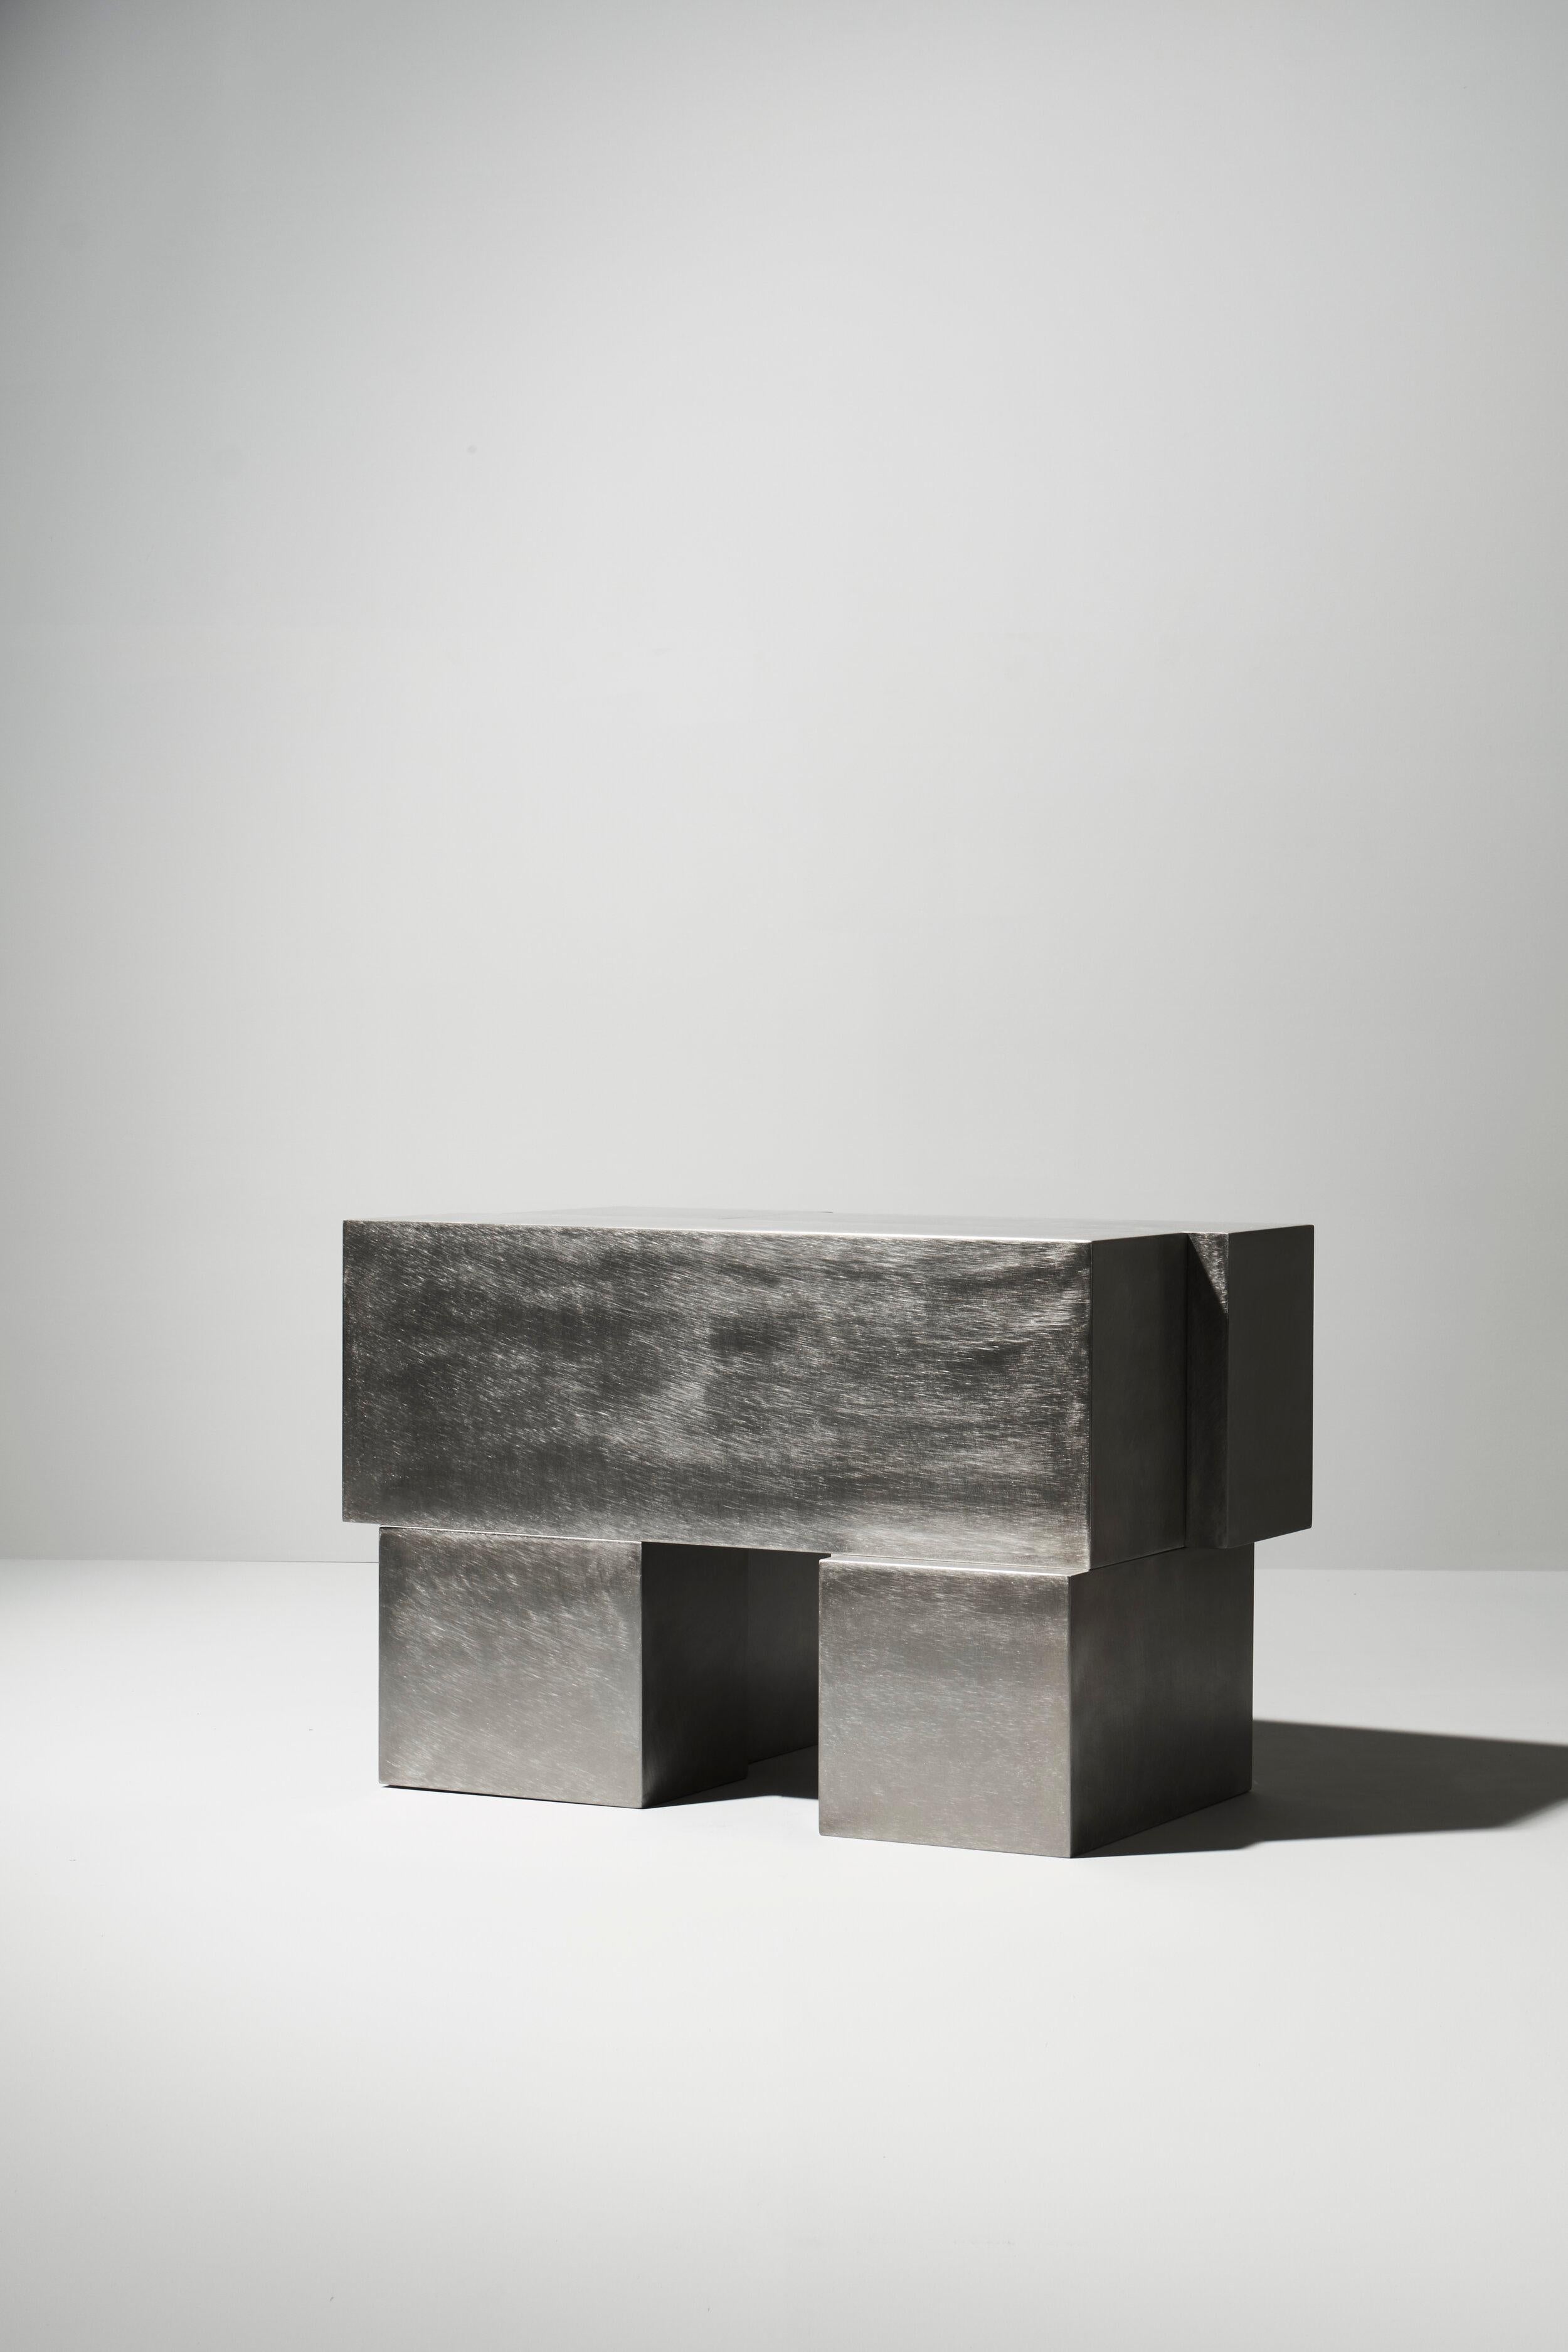 Layered steel seat XII by Hyungshin Hwang
Dimensions: D 60 x W 36 x H 39 cm
Materials: stainless steel

Layered Series is the main theme and concept of work of Hwang, who continues his experiment which is based on architectural composition of